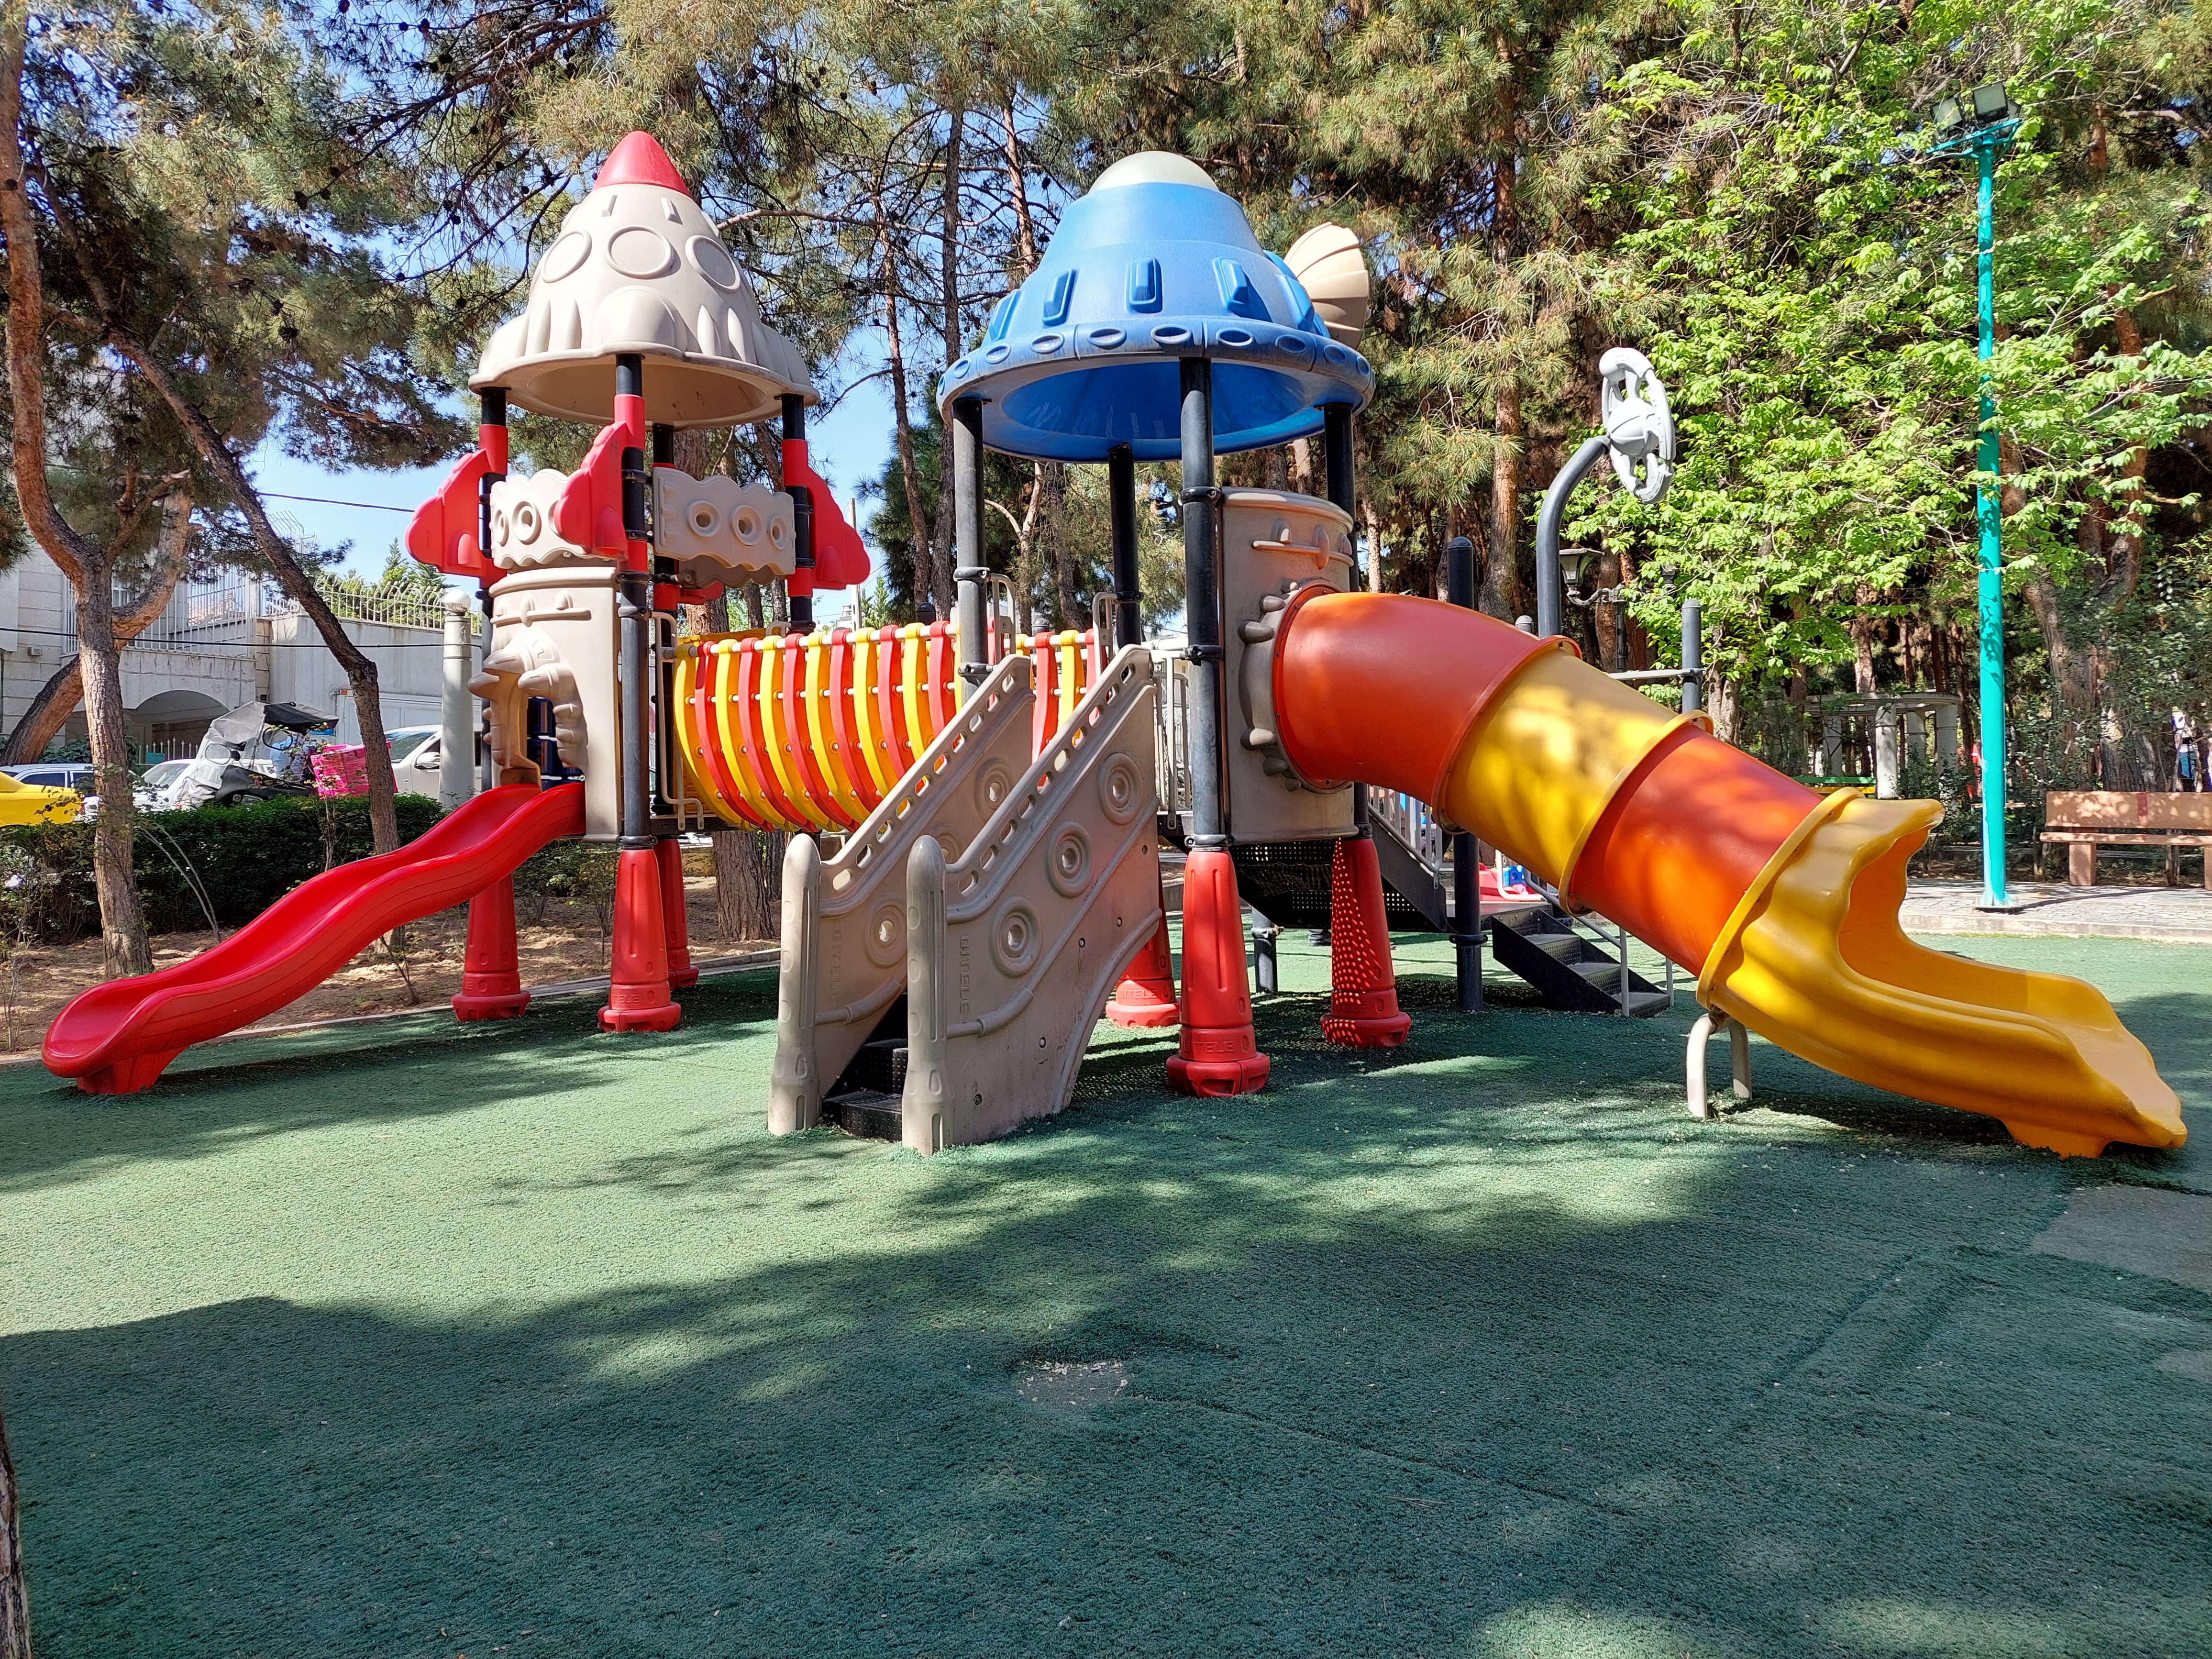 Sample photo of the Galaxy A72 wide-angle camera in the right light - a children's playground in Saba Park, Jordan Street